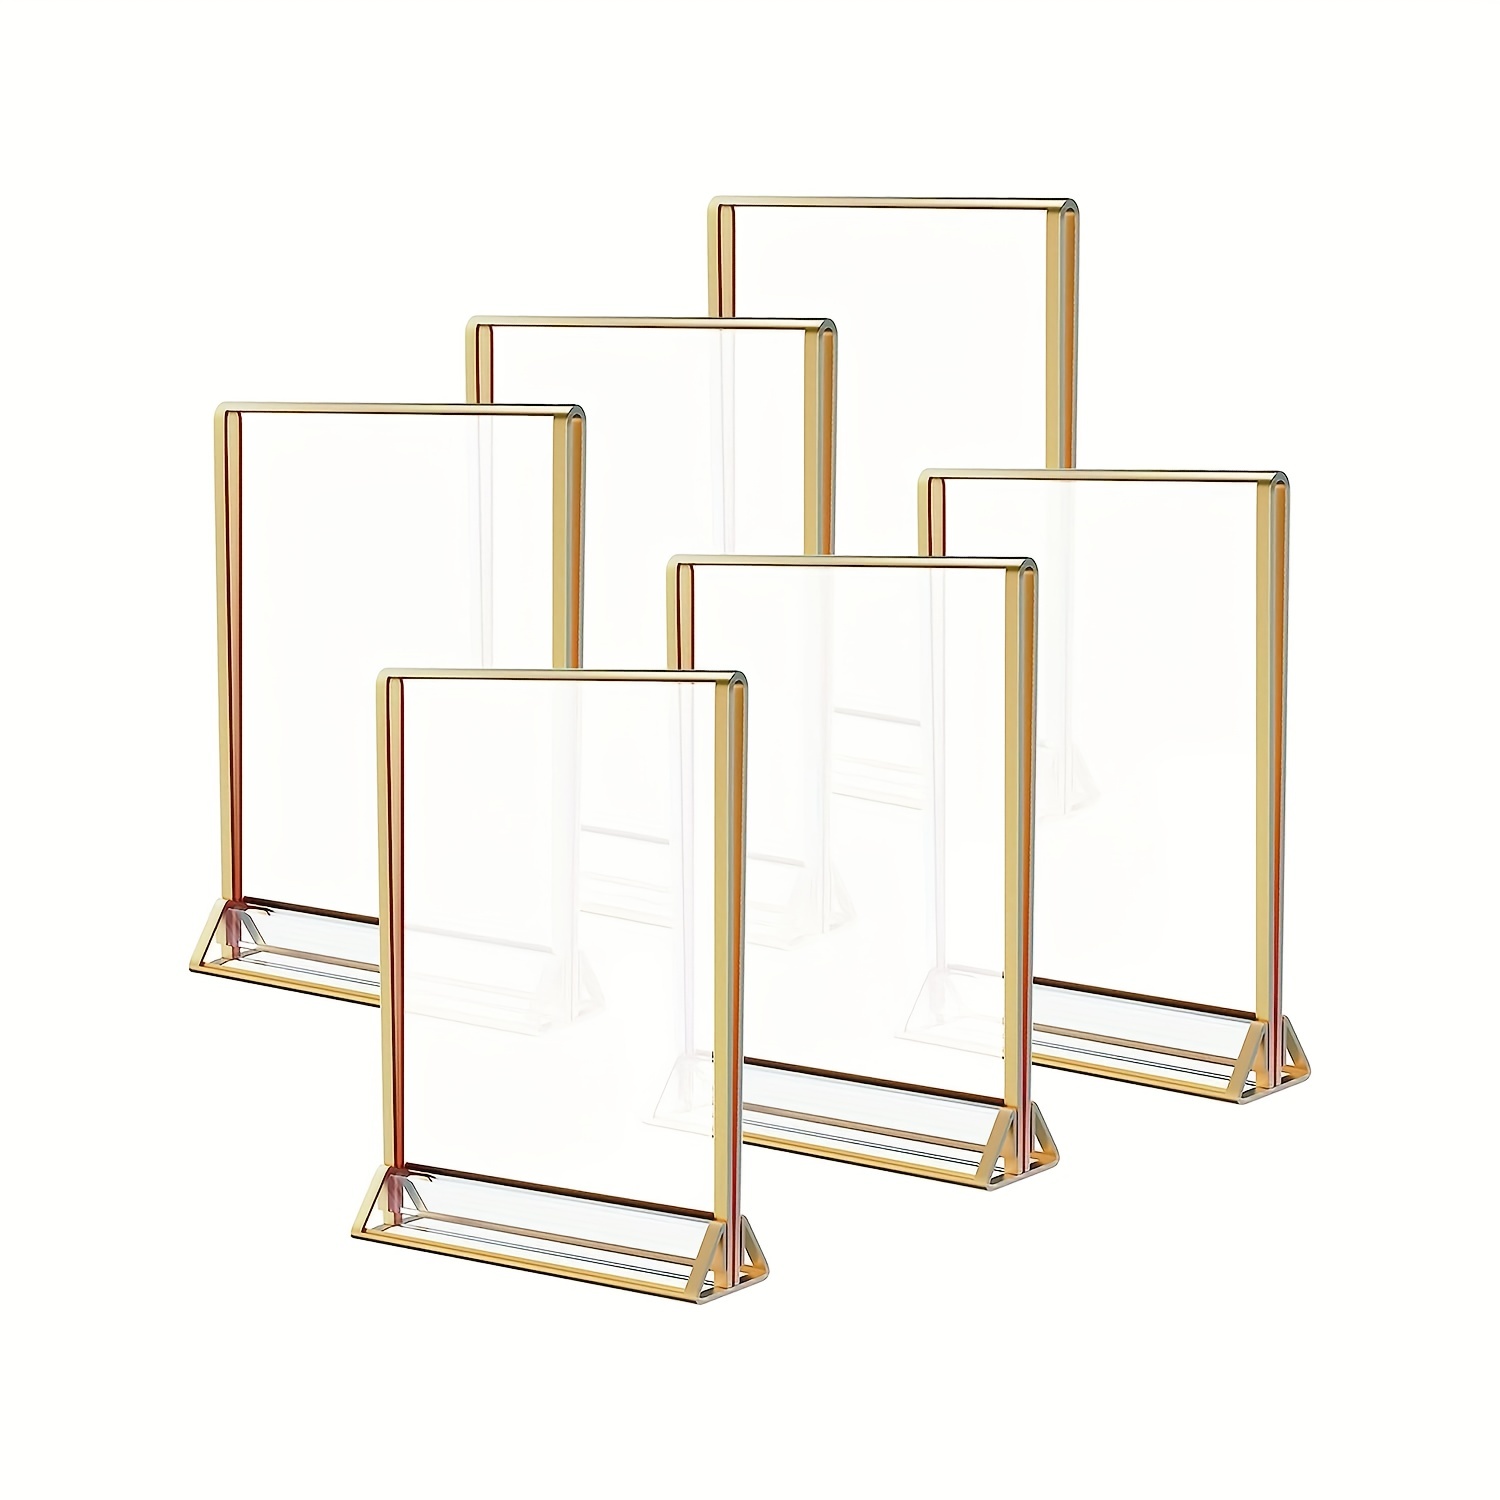 Gold Picture Frames Double Sided - 6 Pack - 5x7 Acrylic Gold Table Num